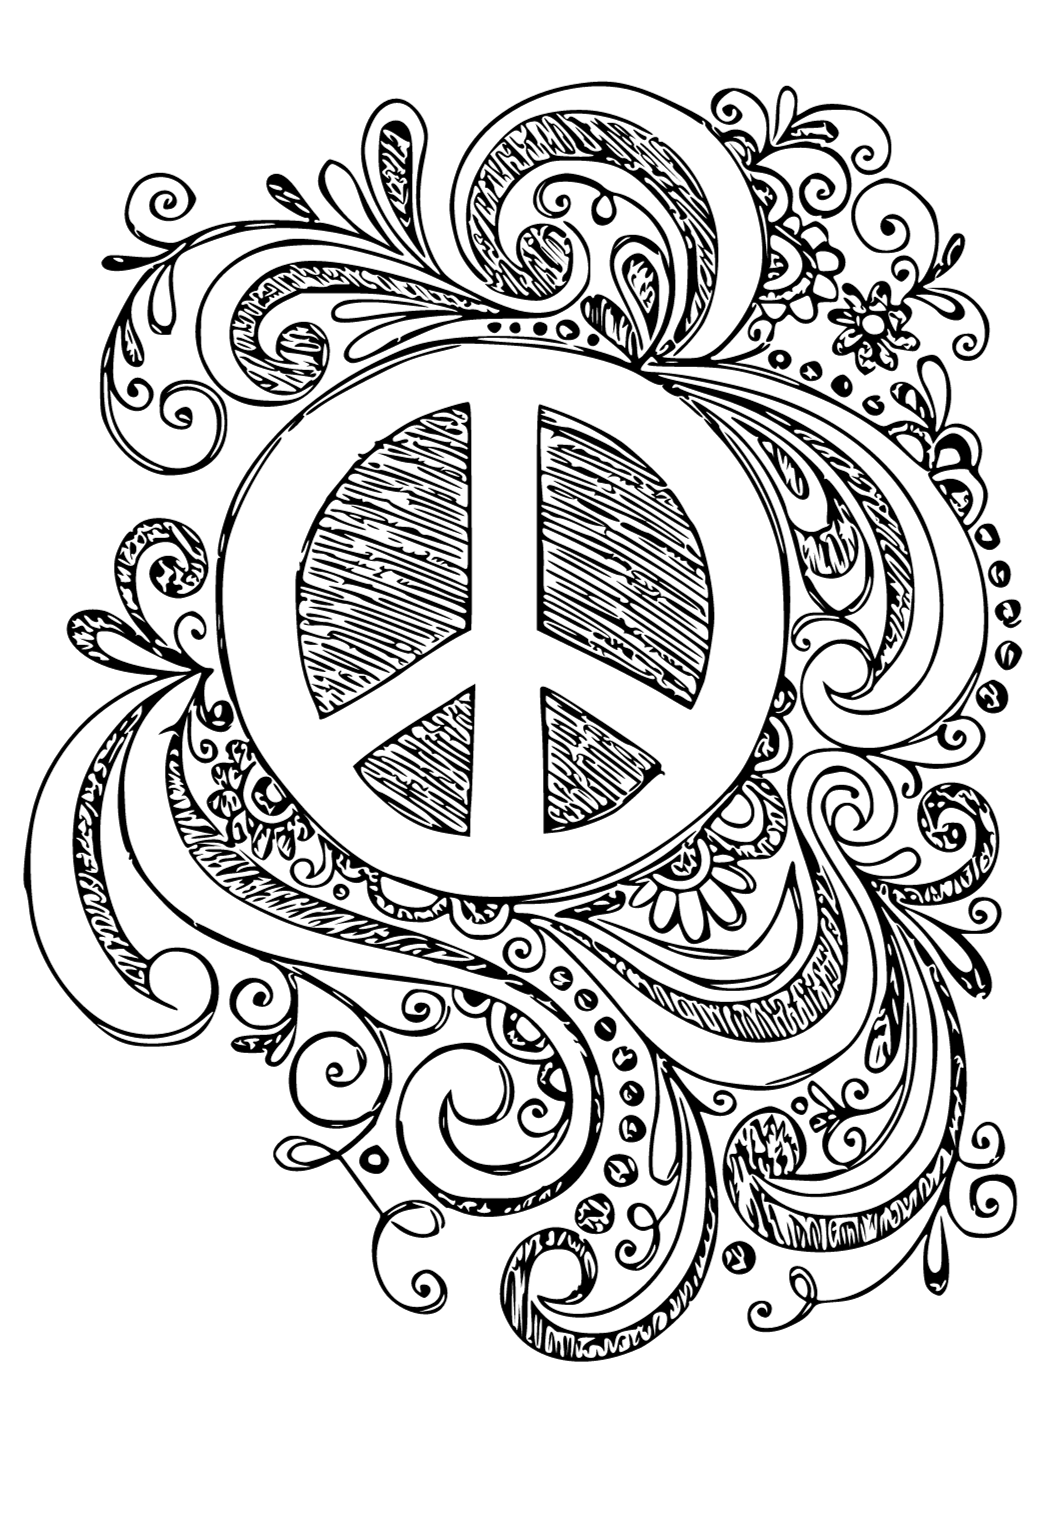 Free printable peace sign waves coloring page for adults and kids